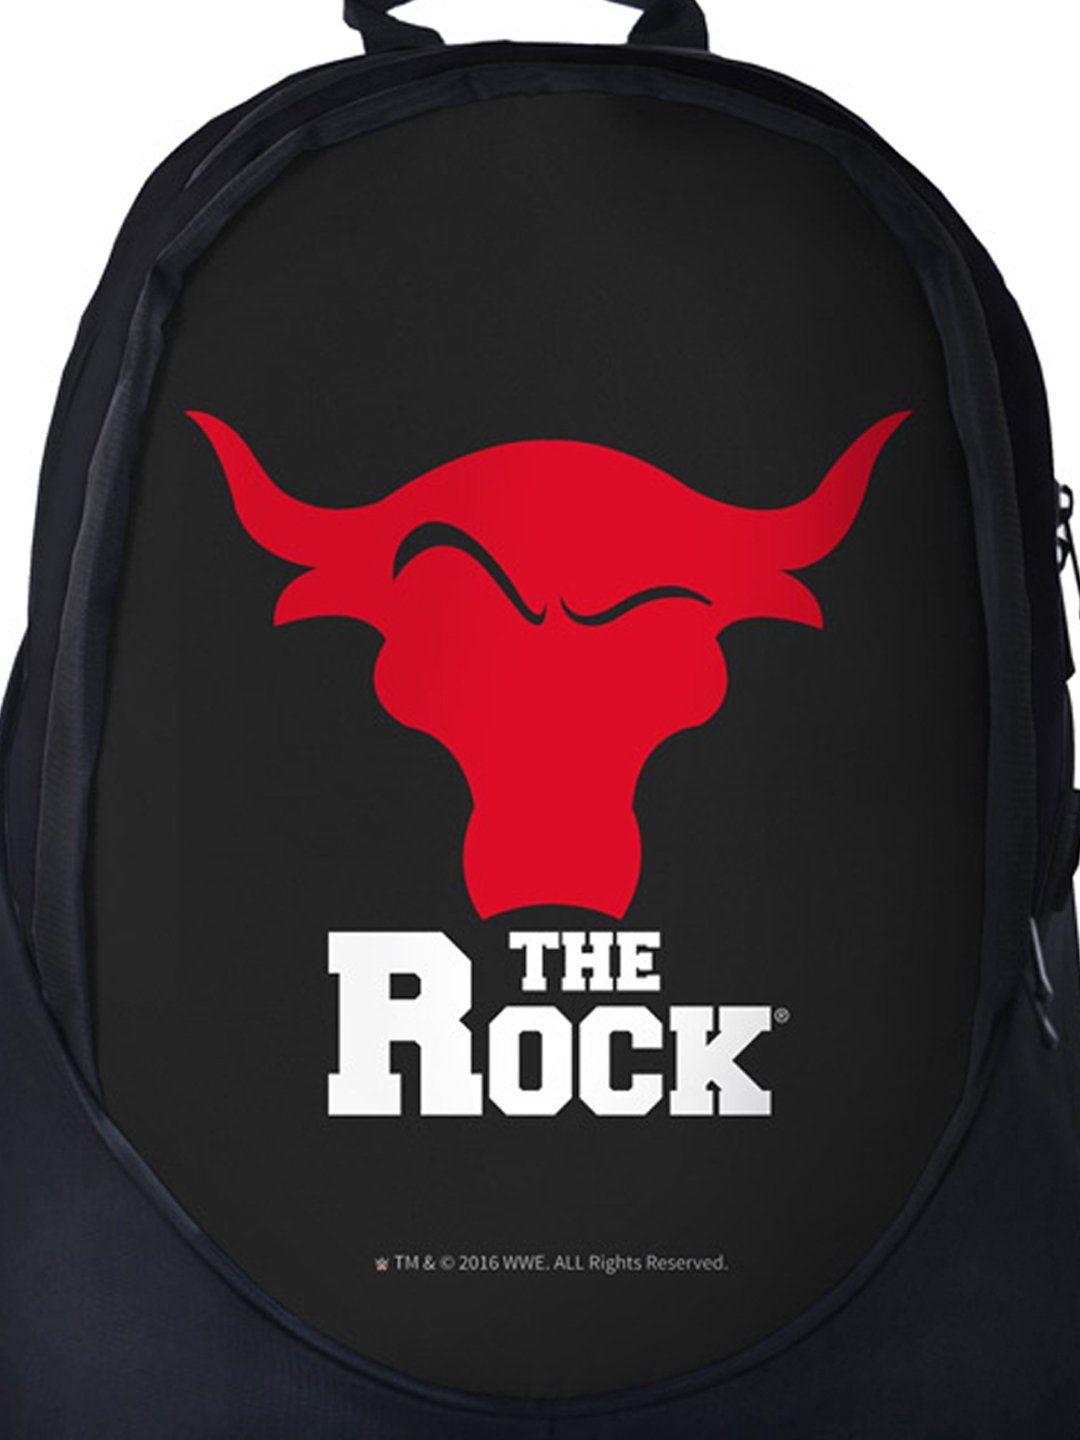 The Rock WWE Logo - The Souled Store WWE : The Rock Backpack for Boy's and Girl's ...